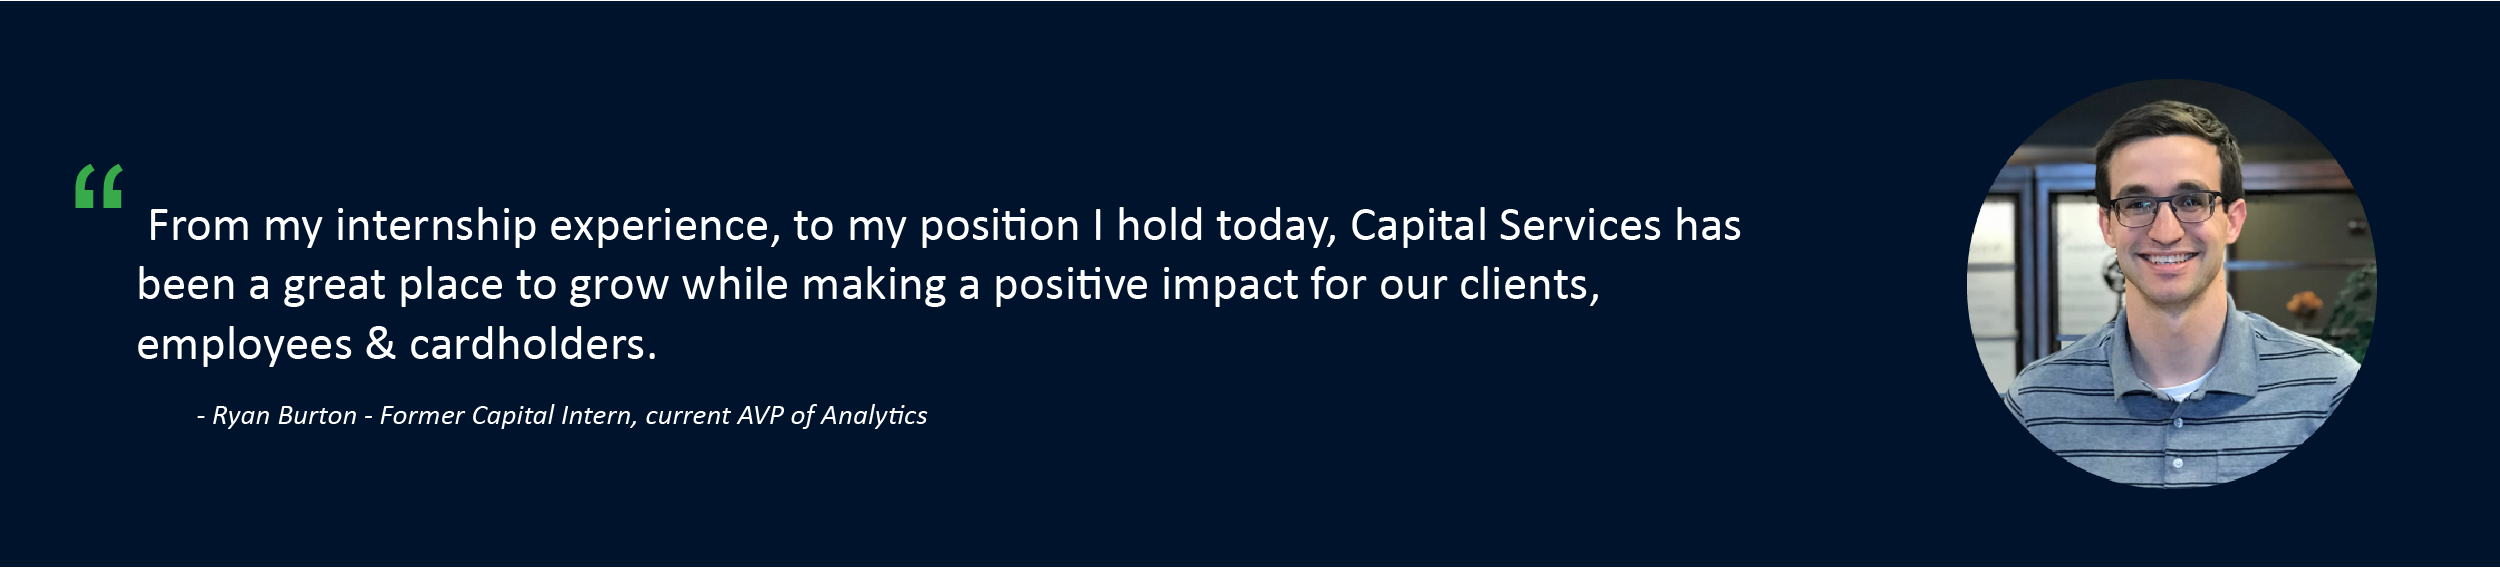 “From my internship experience, to my position I hold today, Capital Services has been a great	place to grow while making a positive impact for our clients, employees, & cardholders.” Ryan Burton - Former Capital Intern, current AVP of Analytics